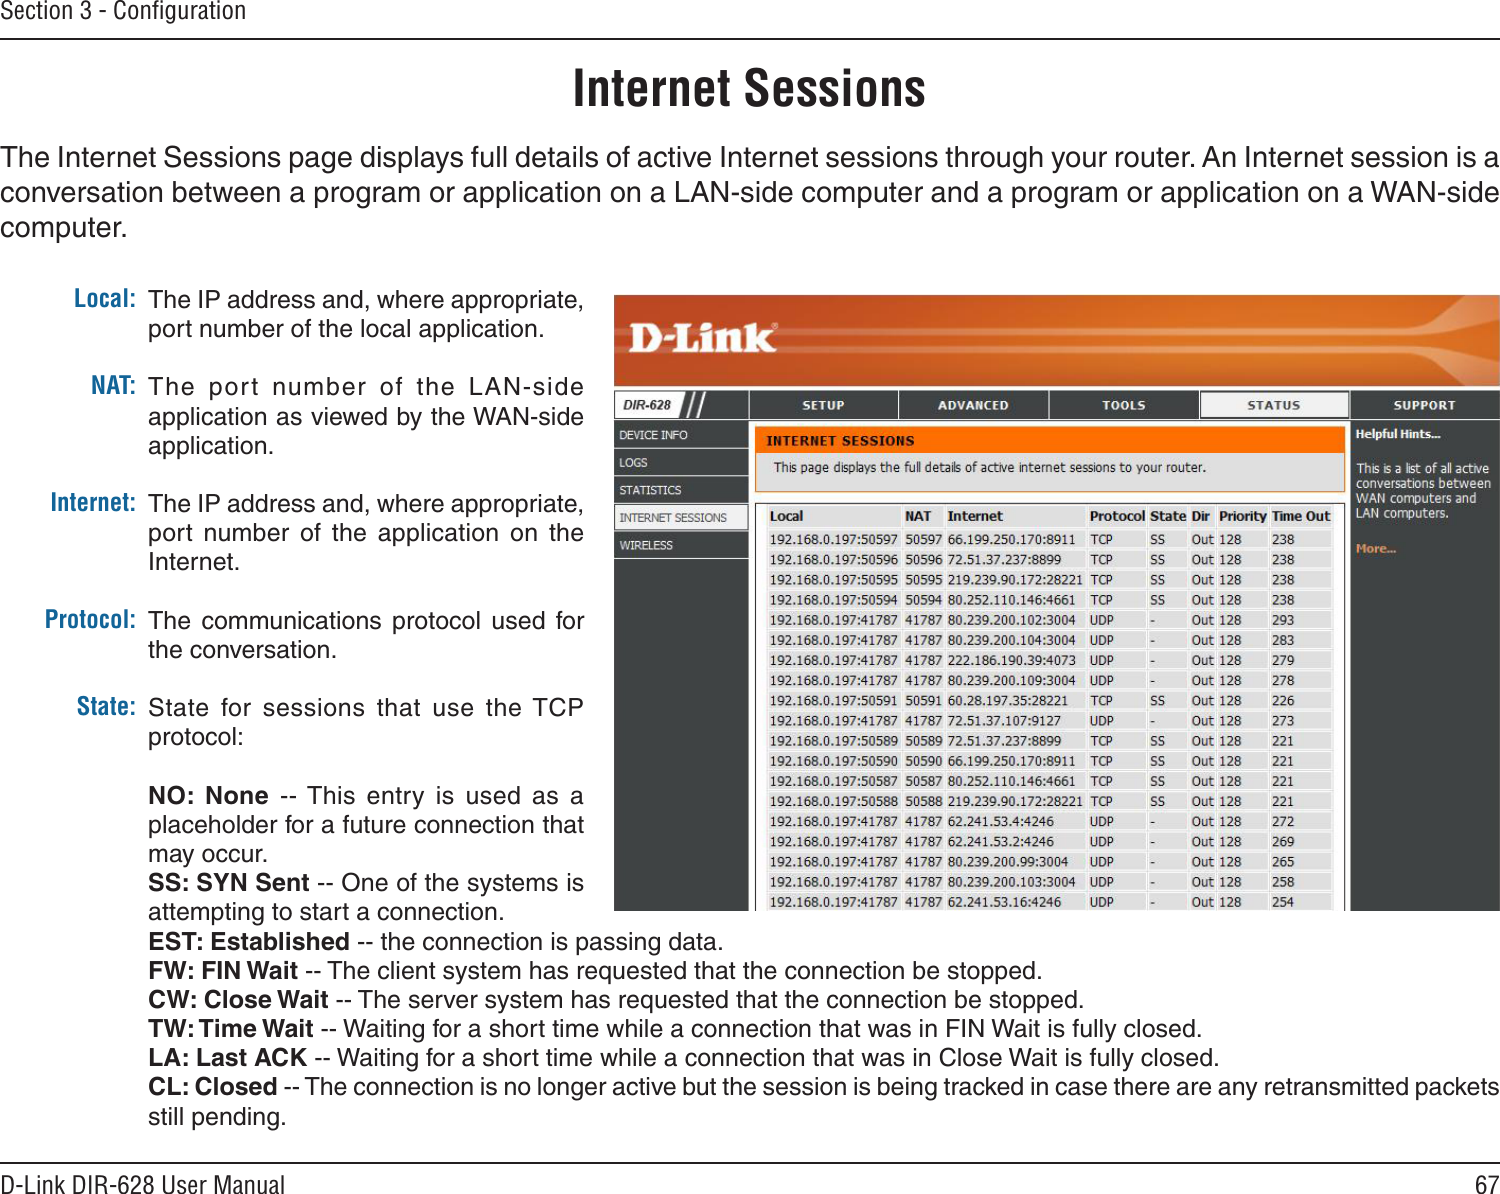 67D-Link DIR-628 User ManualSection 3 - ConﬁgurationInternet SessionsThe Internet Sessions page displays full details of active Internet sessions through your router. An Internet session is a conversation between a program or application on a LAN-side computer and a program or application on a WAN-side computer. Local:NAT:Internet:Protocol:State:The IP address and, where appropriate, port number of the local application. The  port  number  of  the  LAN-side application as viewed by the WAN-side application. The IP address and, where appropriate, port  number  of  the  application  on  the Internet. The  communications  protocol  used  for the conversation. State  for  sessions  that  use  the TCP protocol:NO:. None  -- This  entry  is  used  as  a placeholder for a future connection that may occur.SS:.SYN.Sent -- One of the systems is attempting to start a connection.EST:.Established -- the connection is passing data.FW:.FIN.Wait -- The client system has requested that the connection be stopped.CW:.Close.Wait -- The server system has requested that the connection be stopped.TW:.Time.Wait -- Waiting for a short time while a connection that was in FIN Wait is fully closed.LA:.Last.ACK -- Waiting for a short time while a connection that was in Close Wait is fully closed.CL:.Closed -- The connection is no longer active but the session is being tracked in case there are any retransmitted packets still pending.